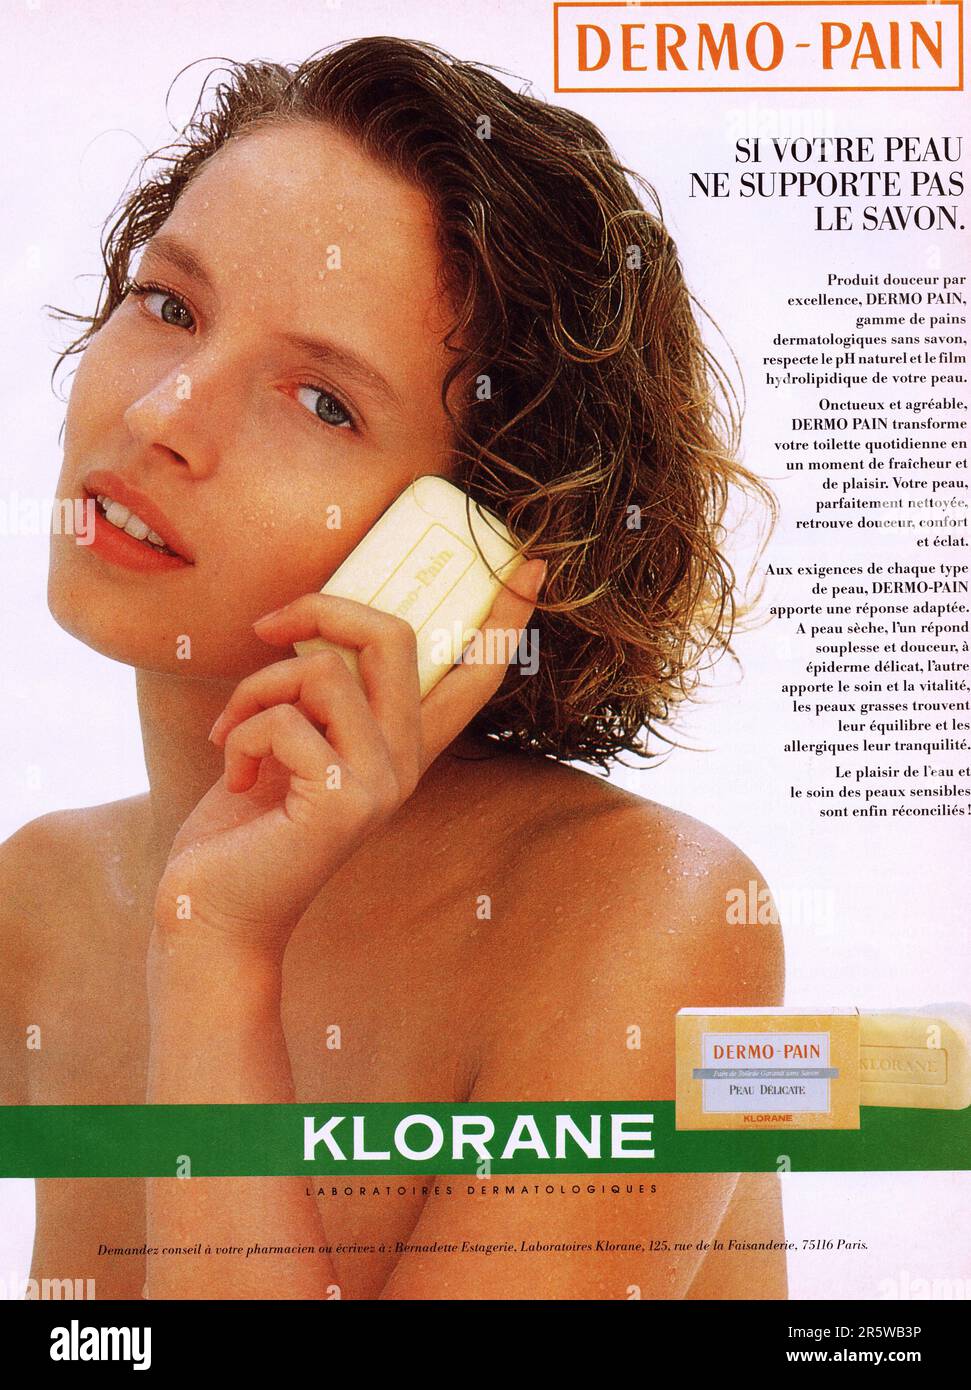 Klorane Dermo-Pain soap advertisement Klorane face soap commercial Klorane French advertising Stock Photo